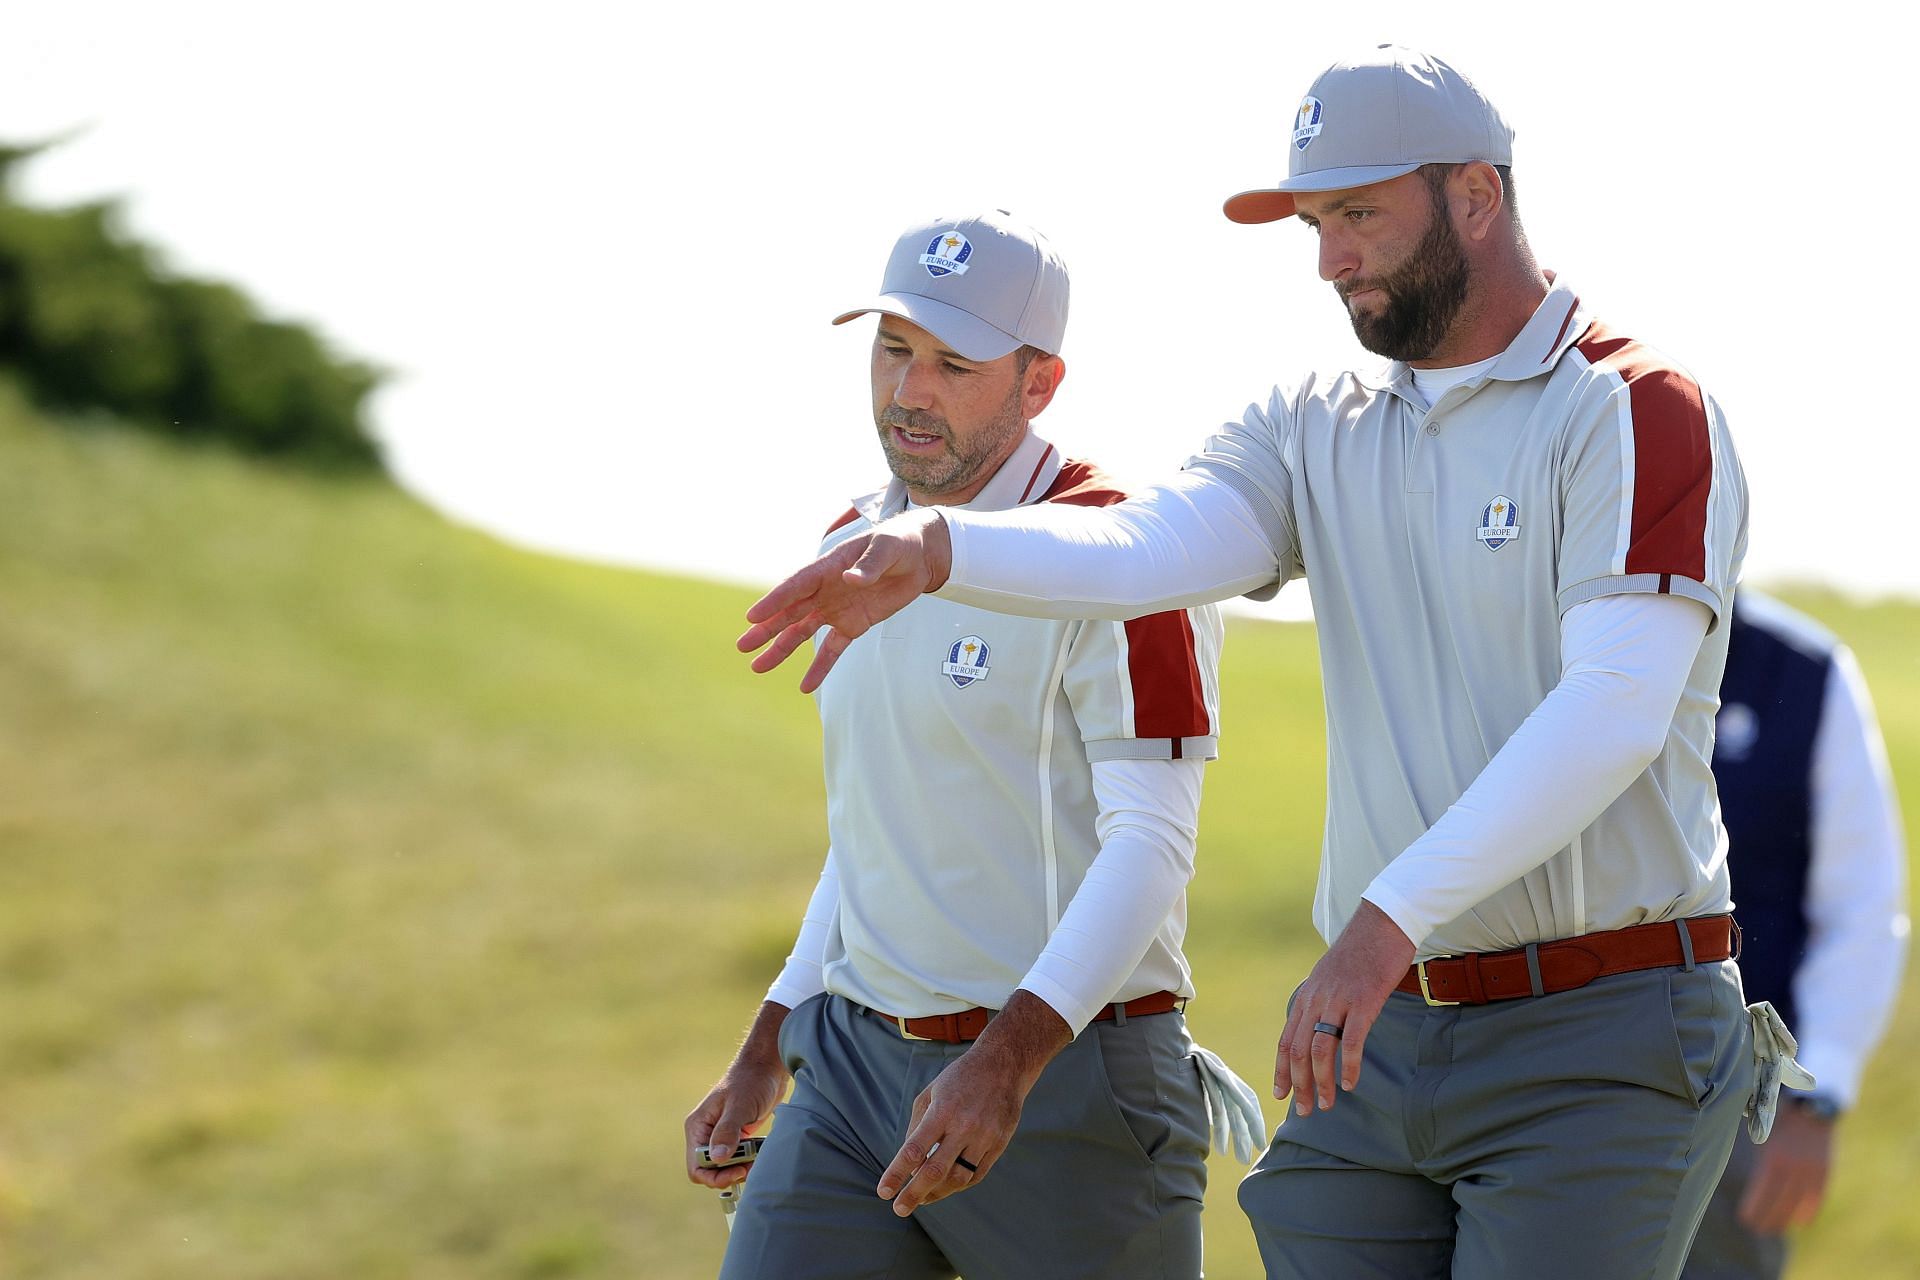 Jon Rahm and Sergio Garcia at the 43rd Ryder Cup - Morning Foursome Matches